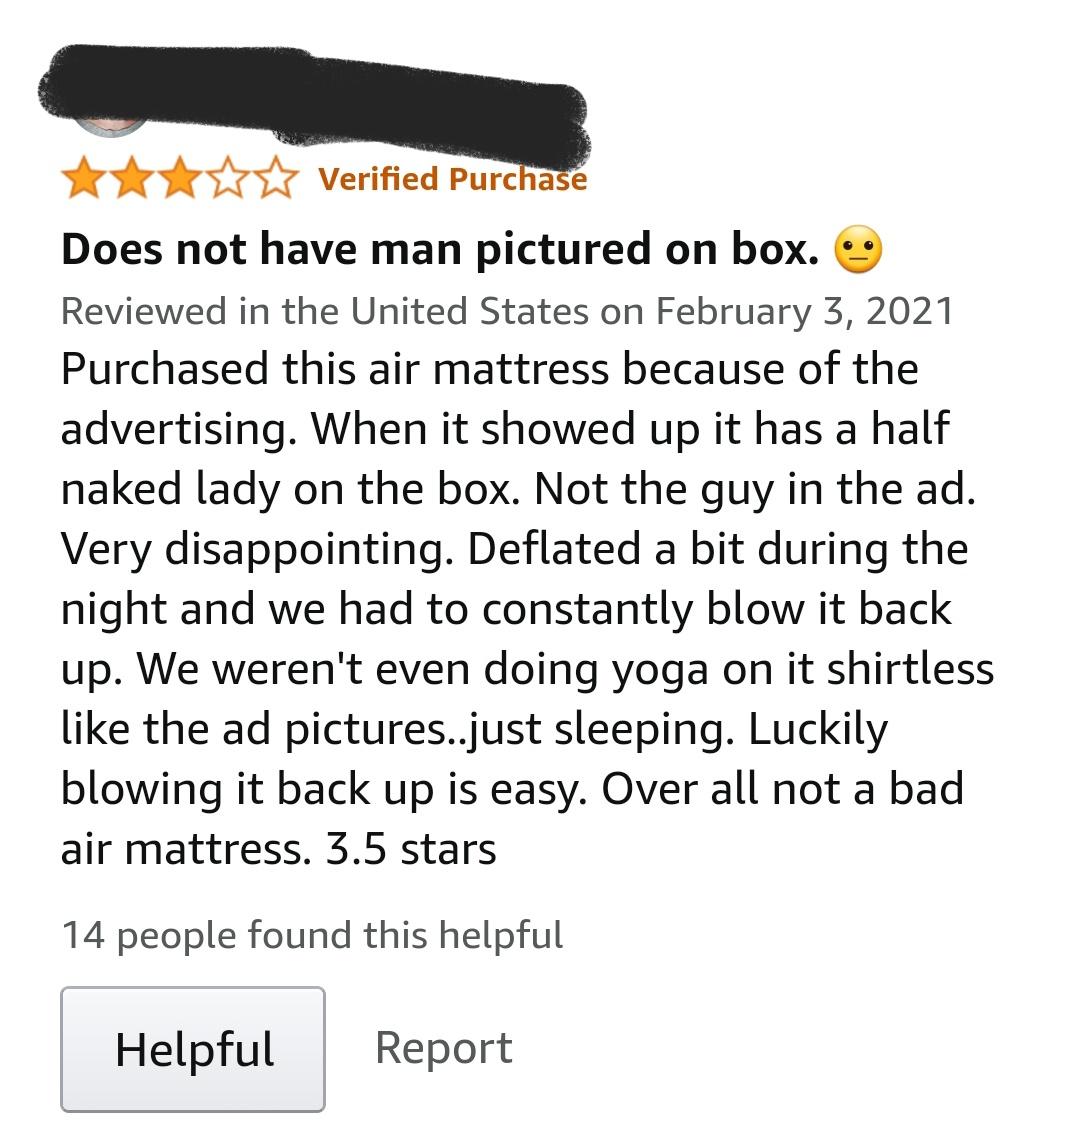 Amazon's Creative Air Mattress Advertisement Leaves Buyer Disappointed